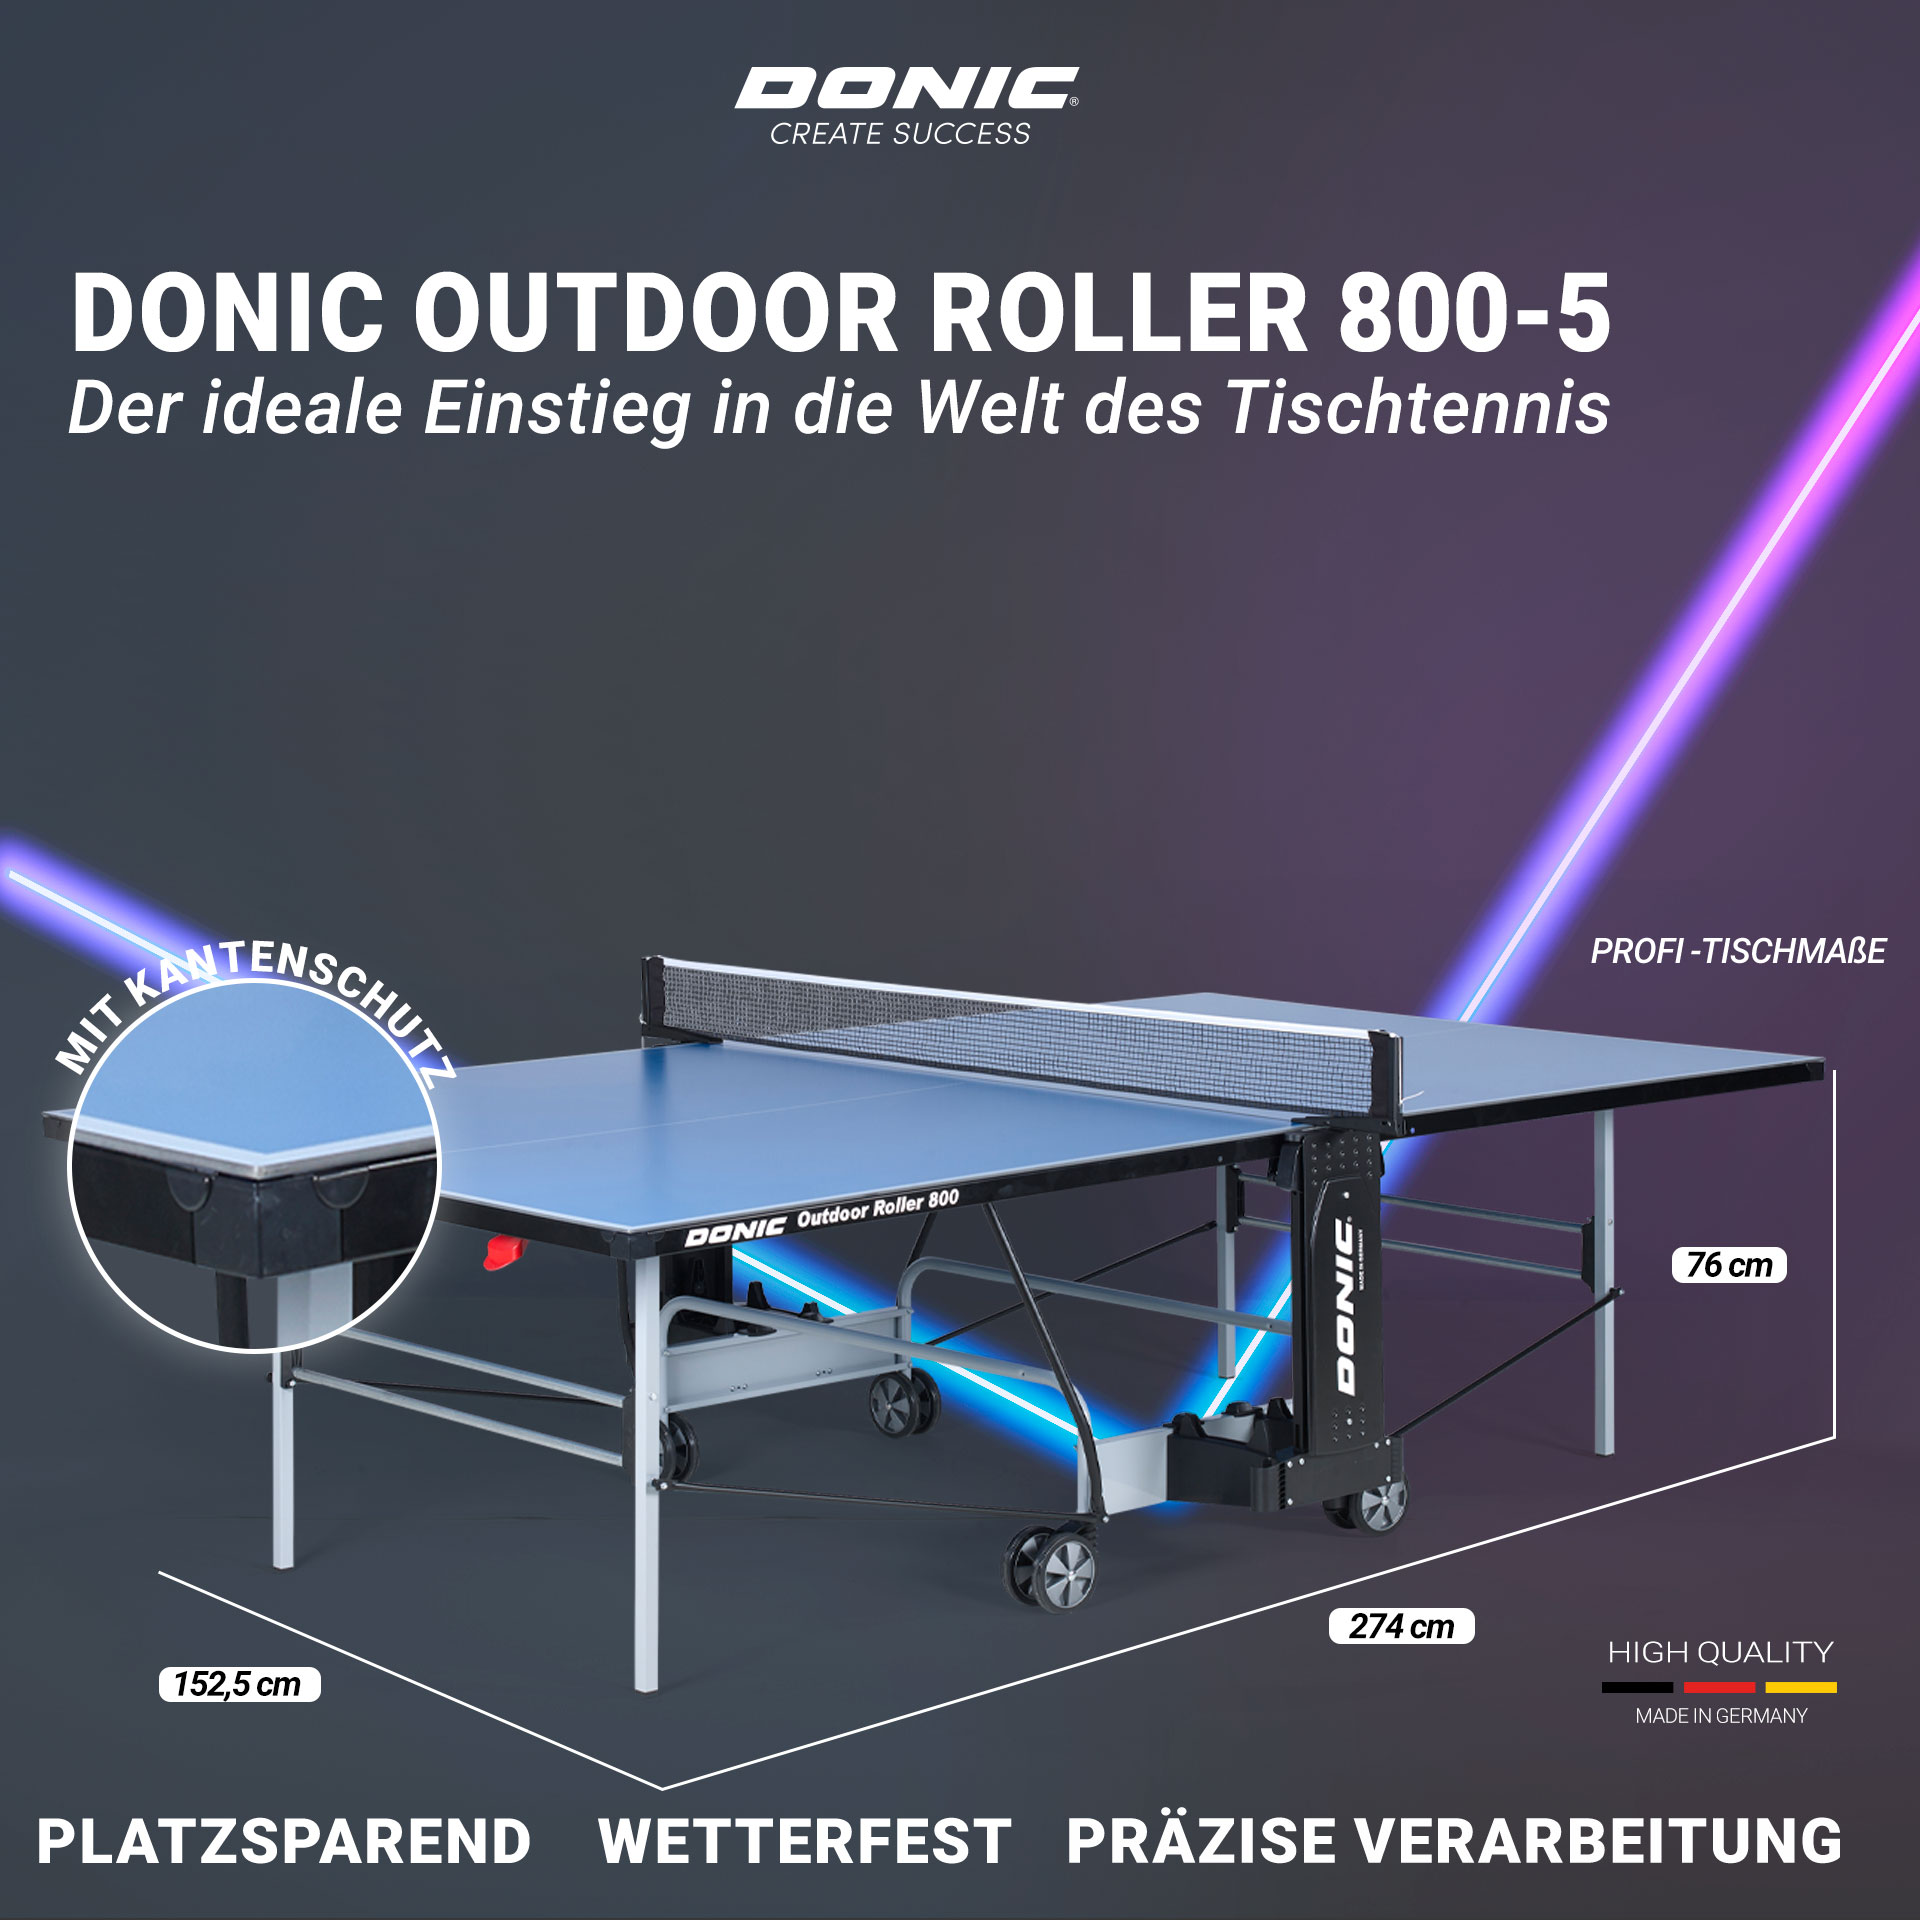 Donic Outdoor Roller 800 -5 SUCCESS | CREATE